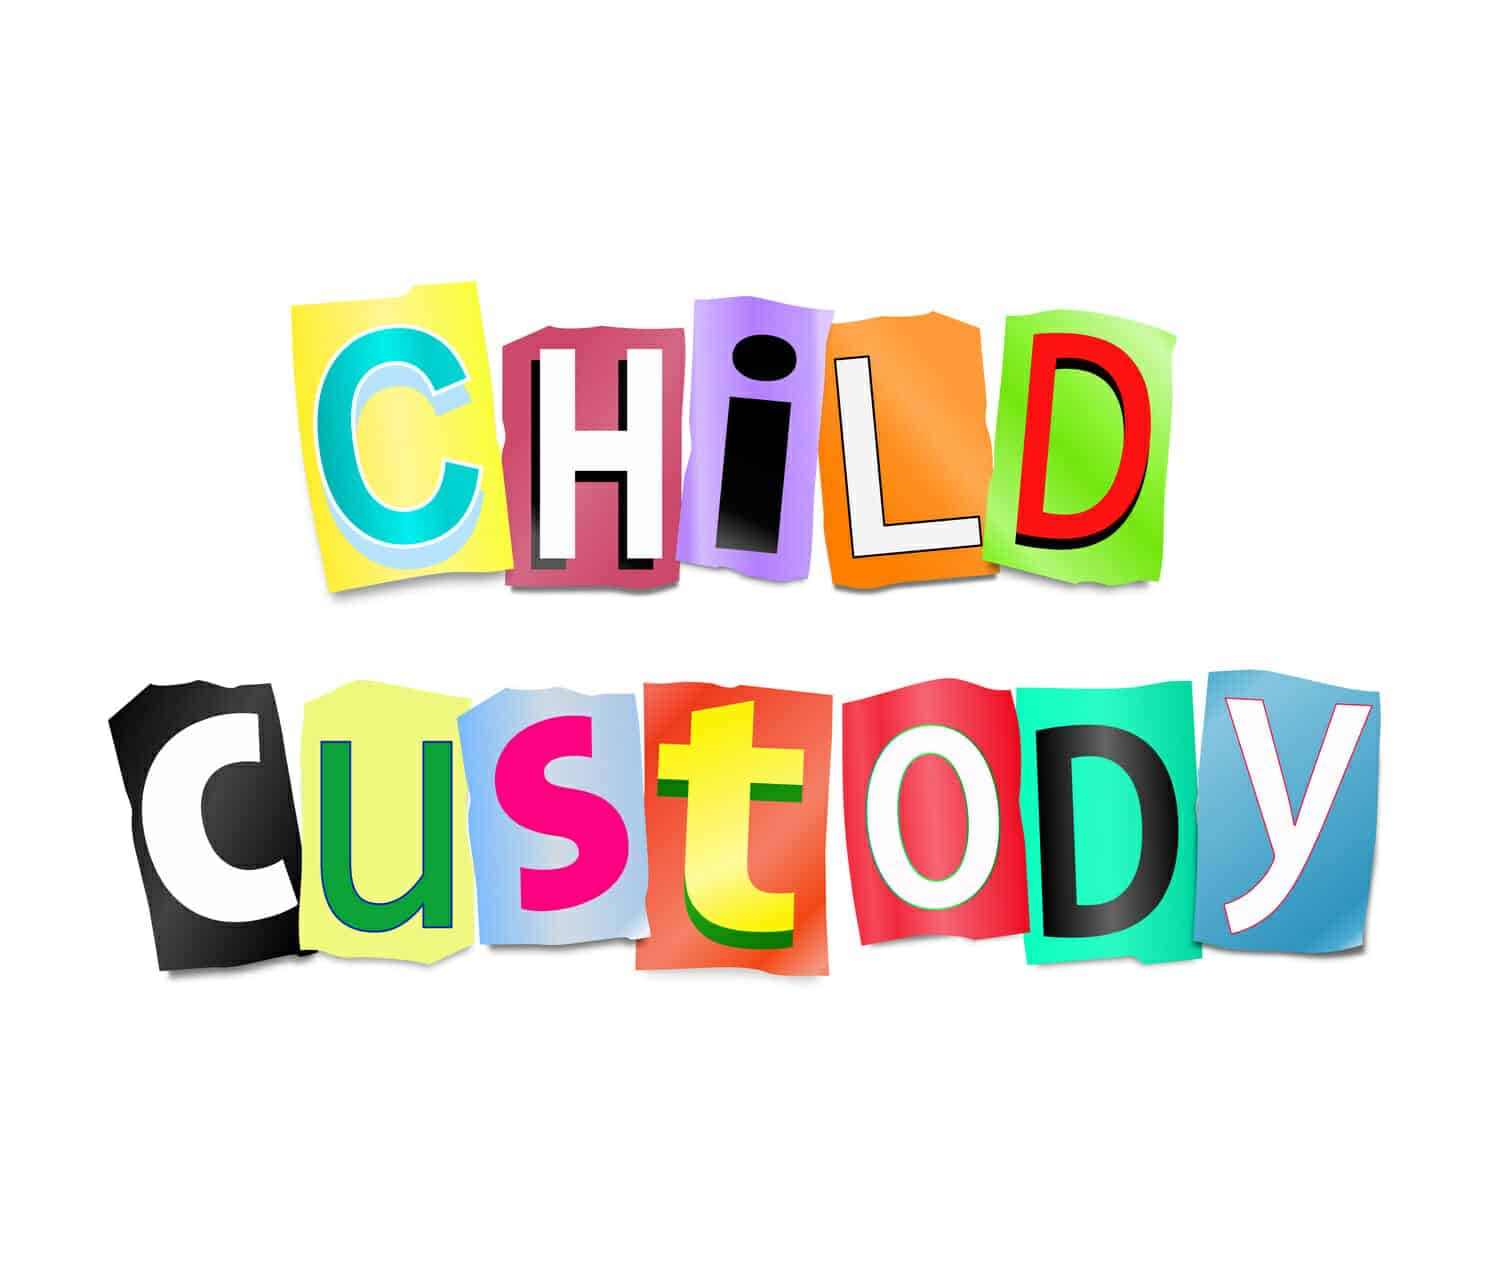 Illustration depicting a set of cut out printed letters formed to arrange the words child custody.